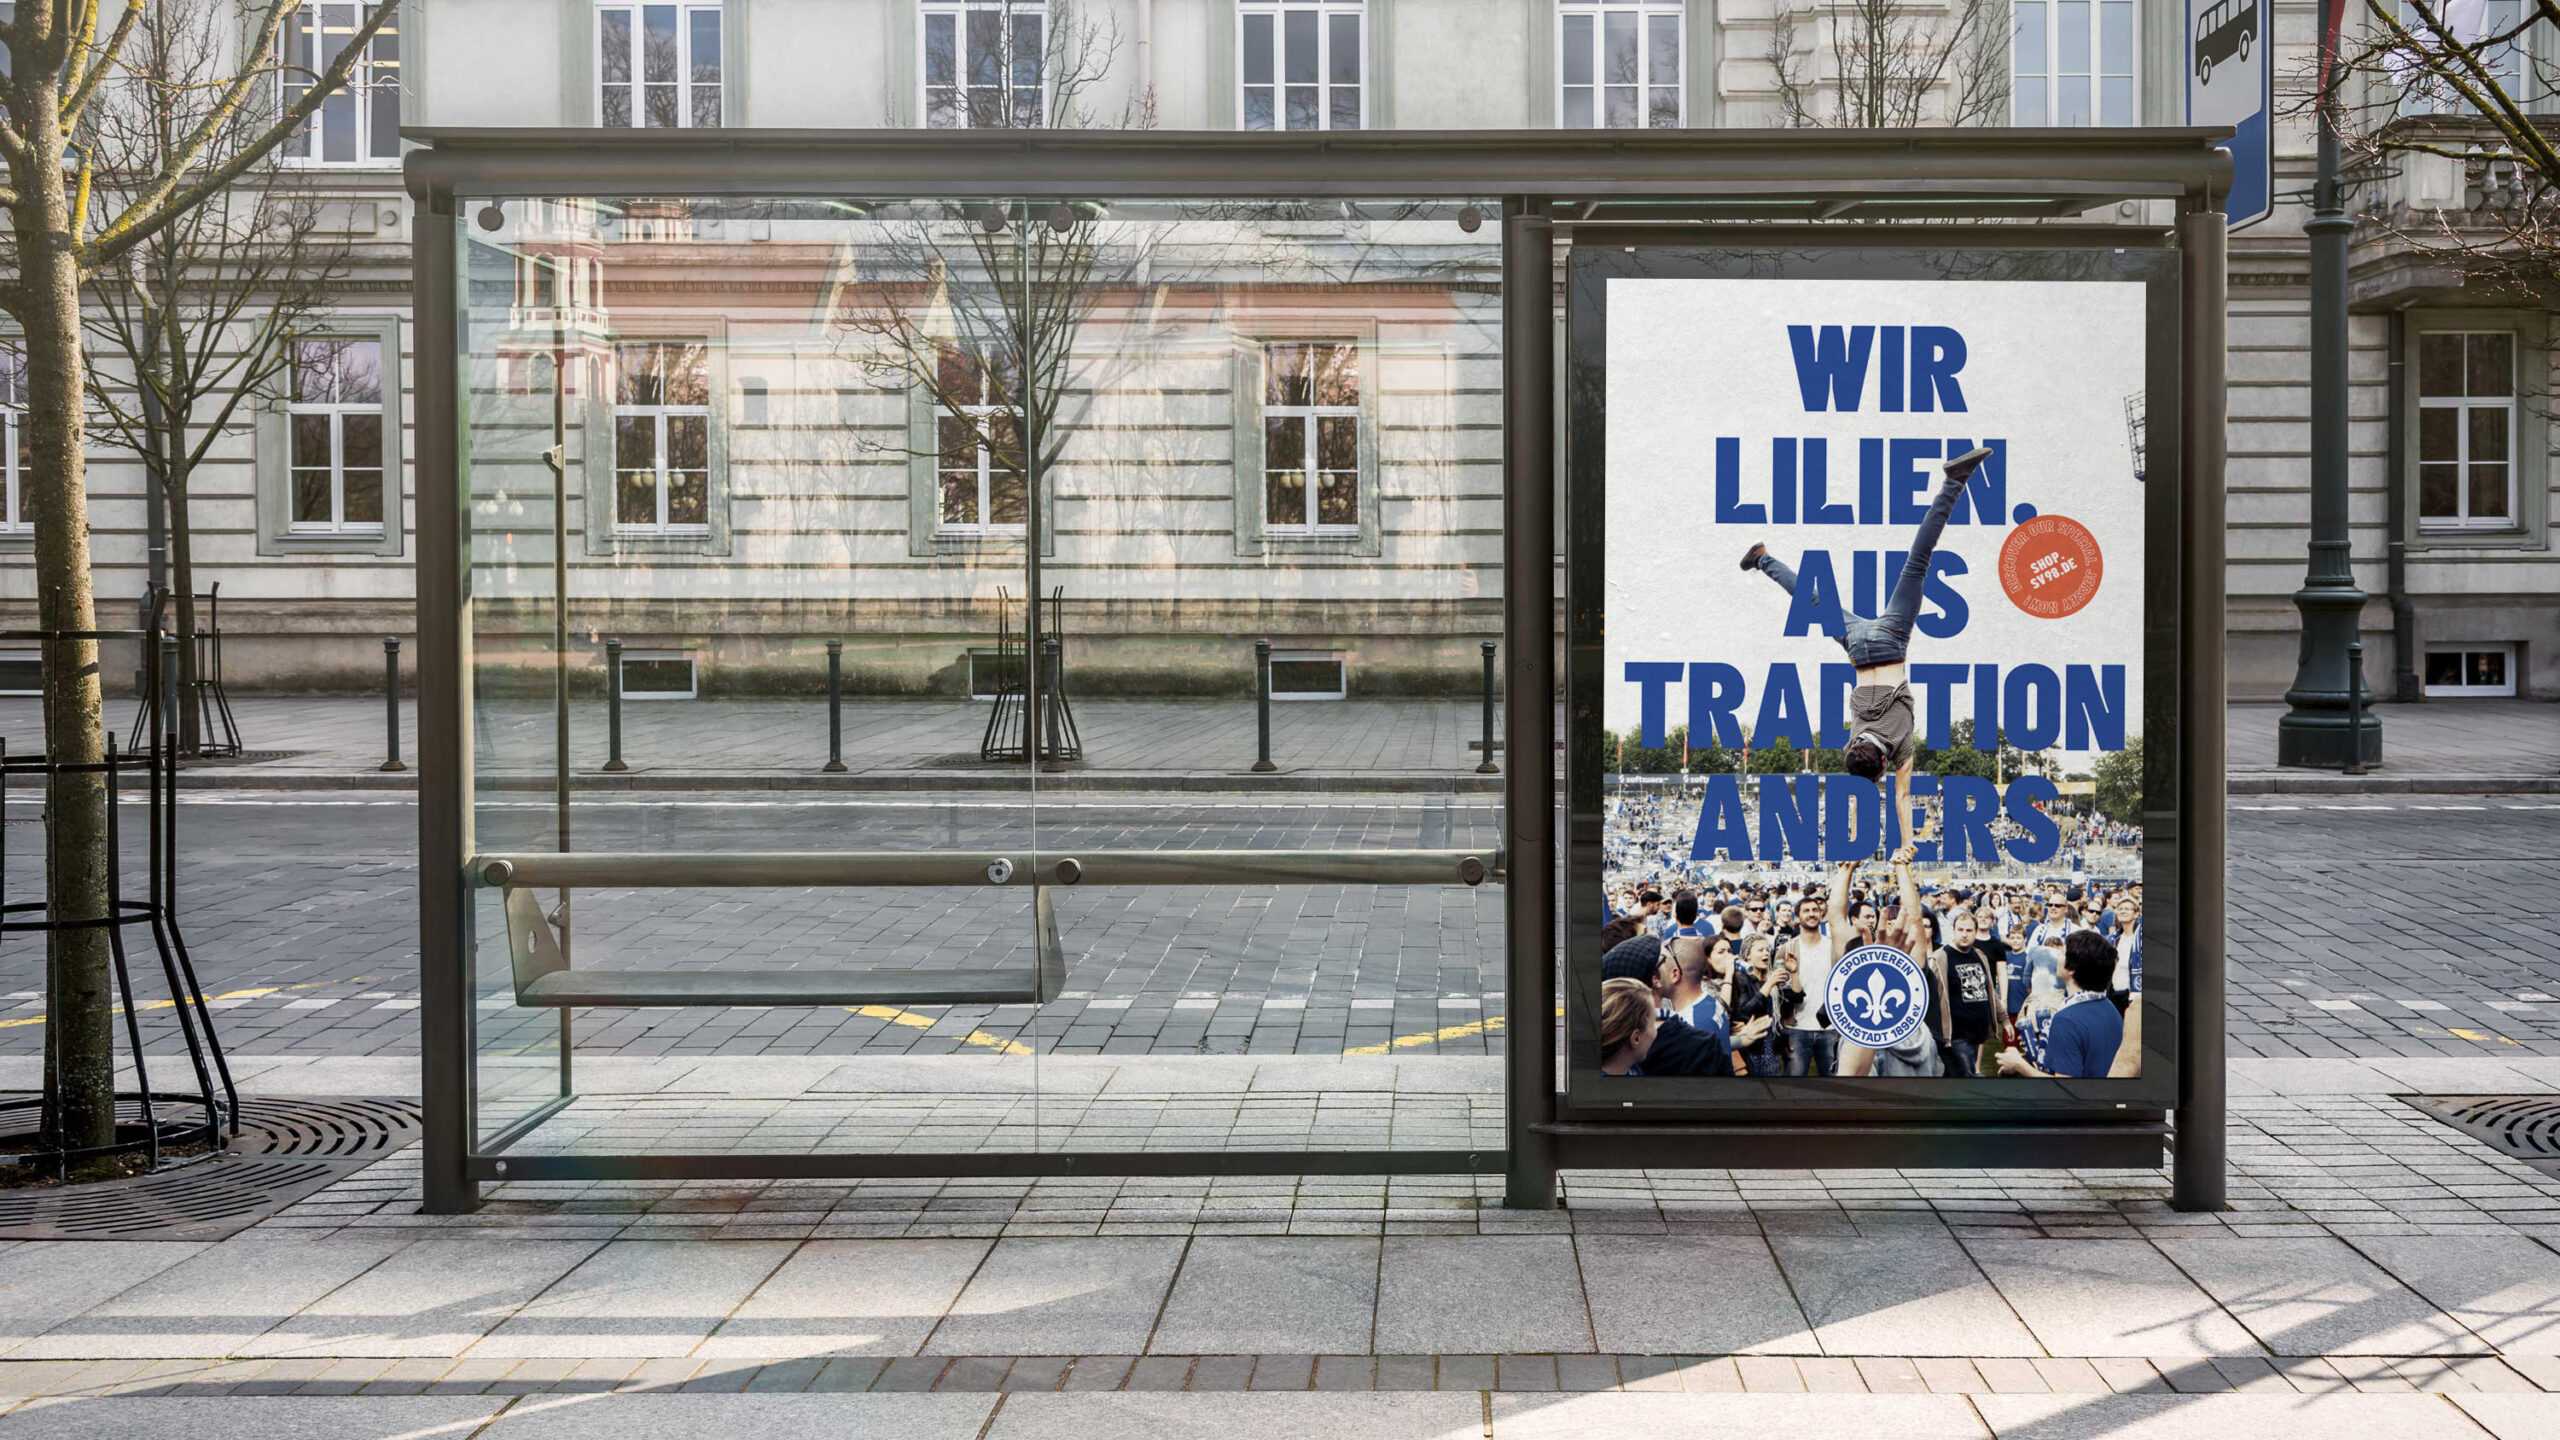 Bus station with Lilien poster